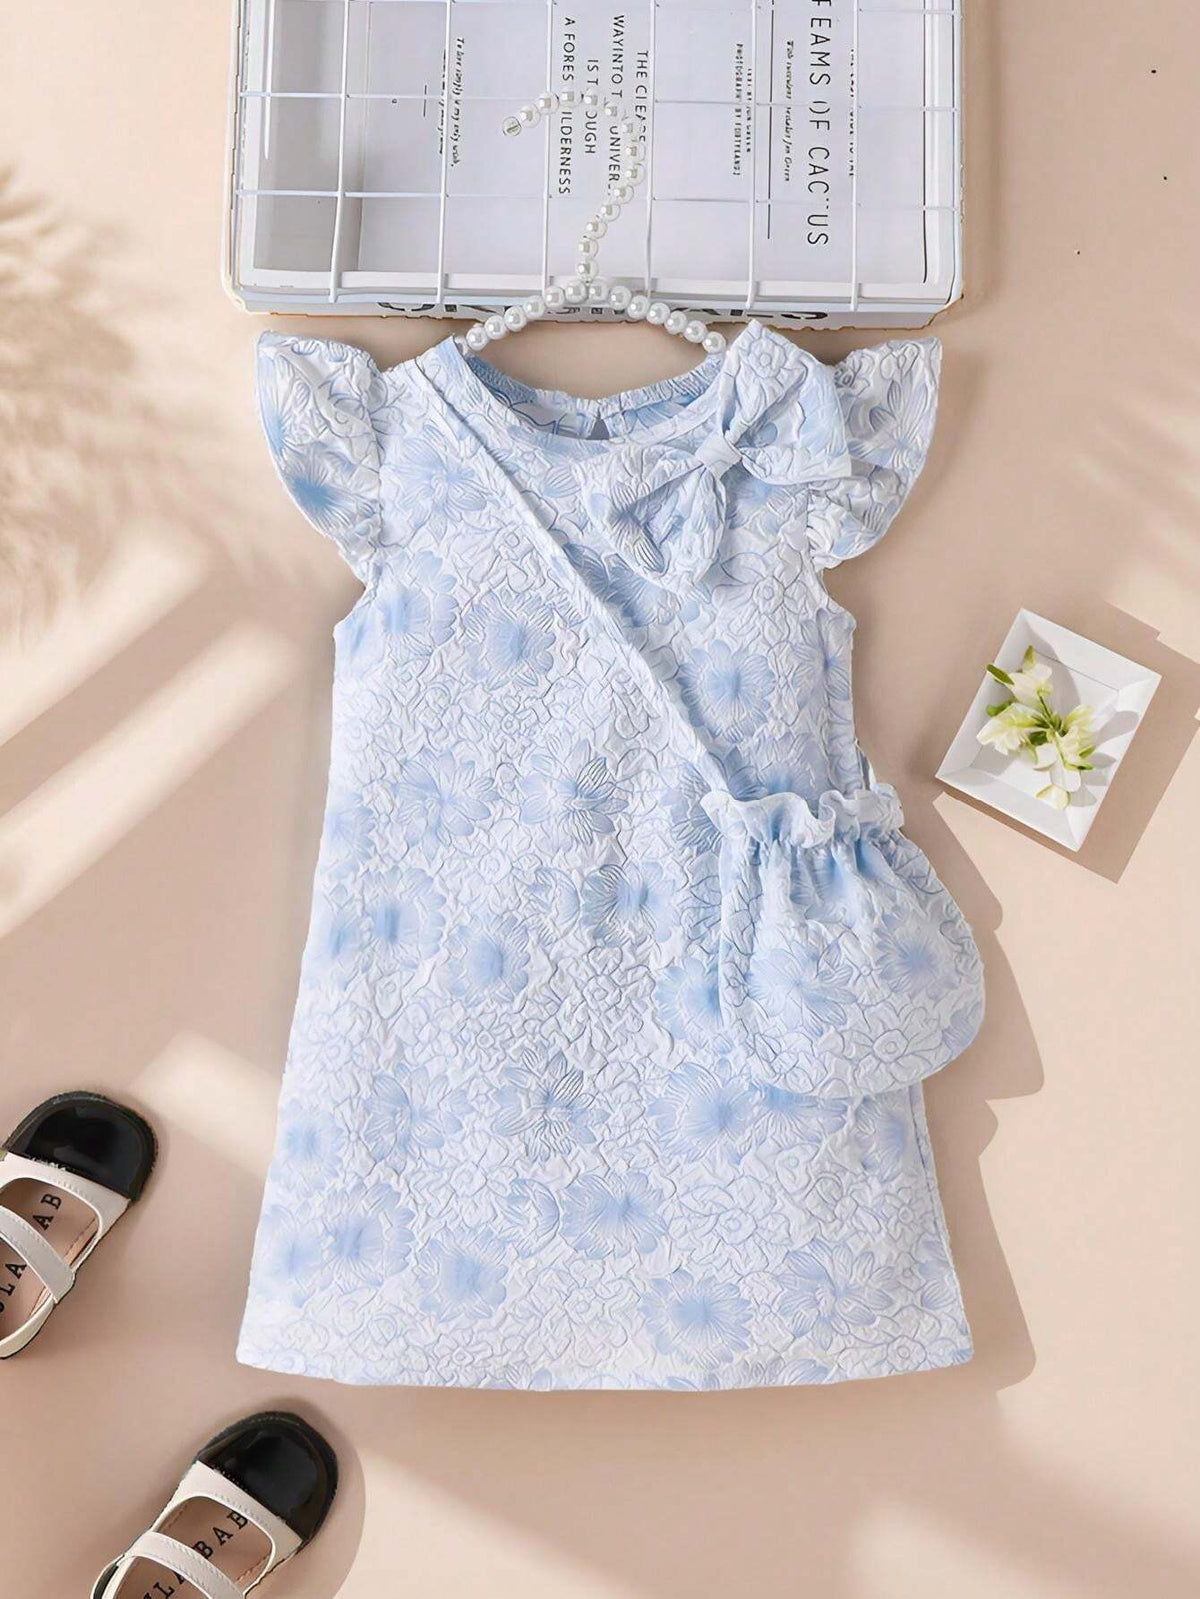 Girls' Fashionable Cap Sleeve Dress With Embossed Floral Print And Water Drop Buckle Detail + Bag